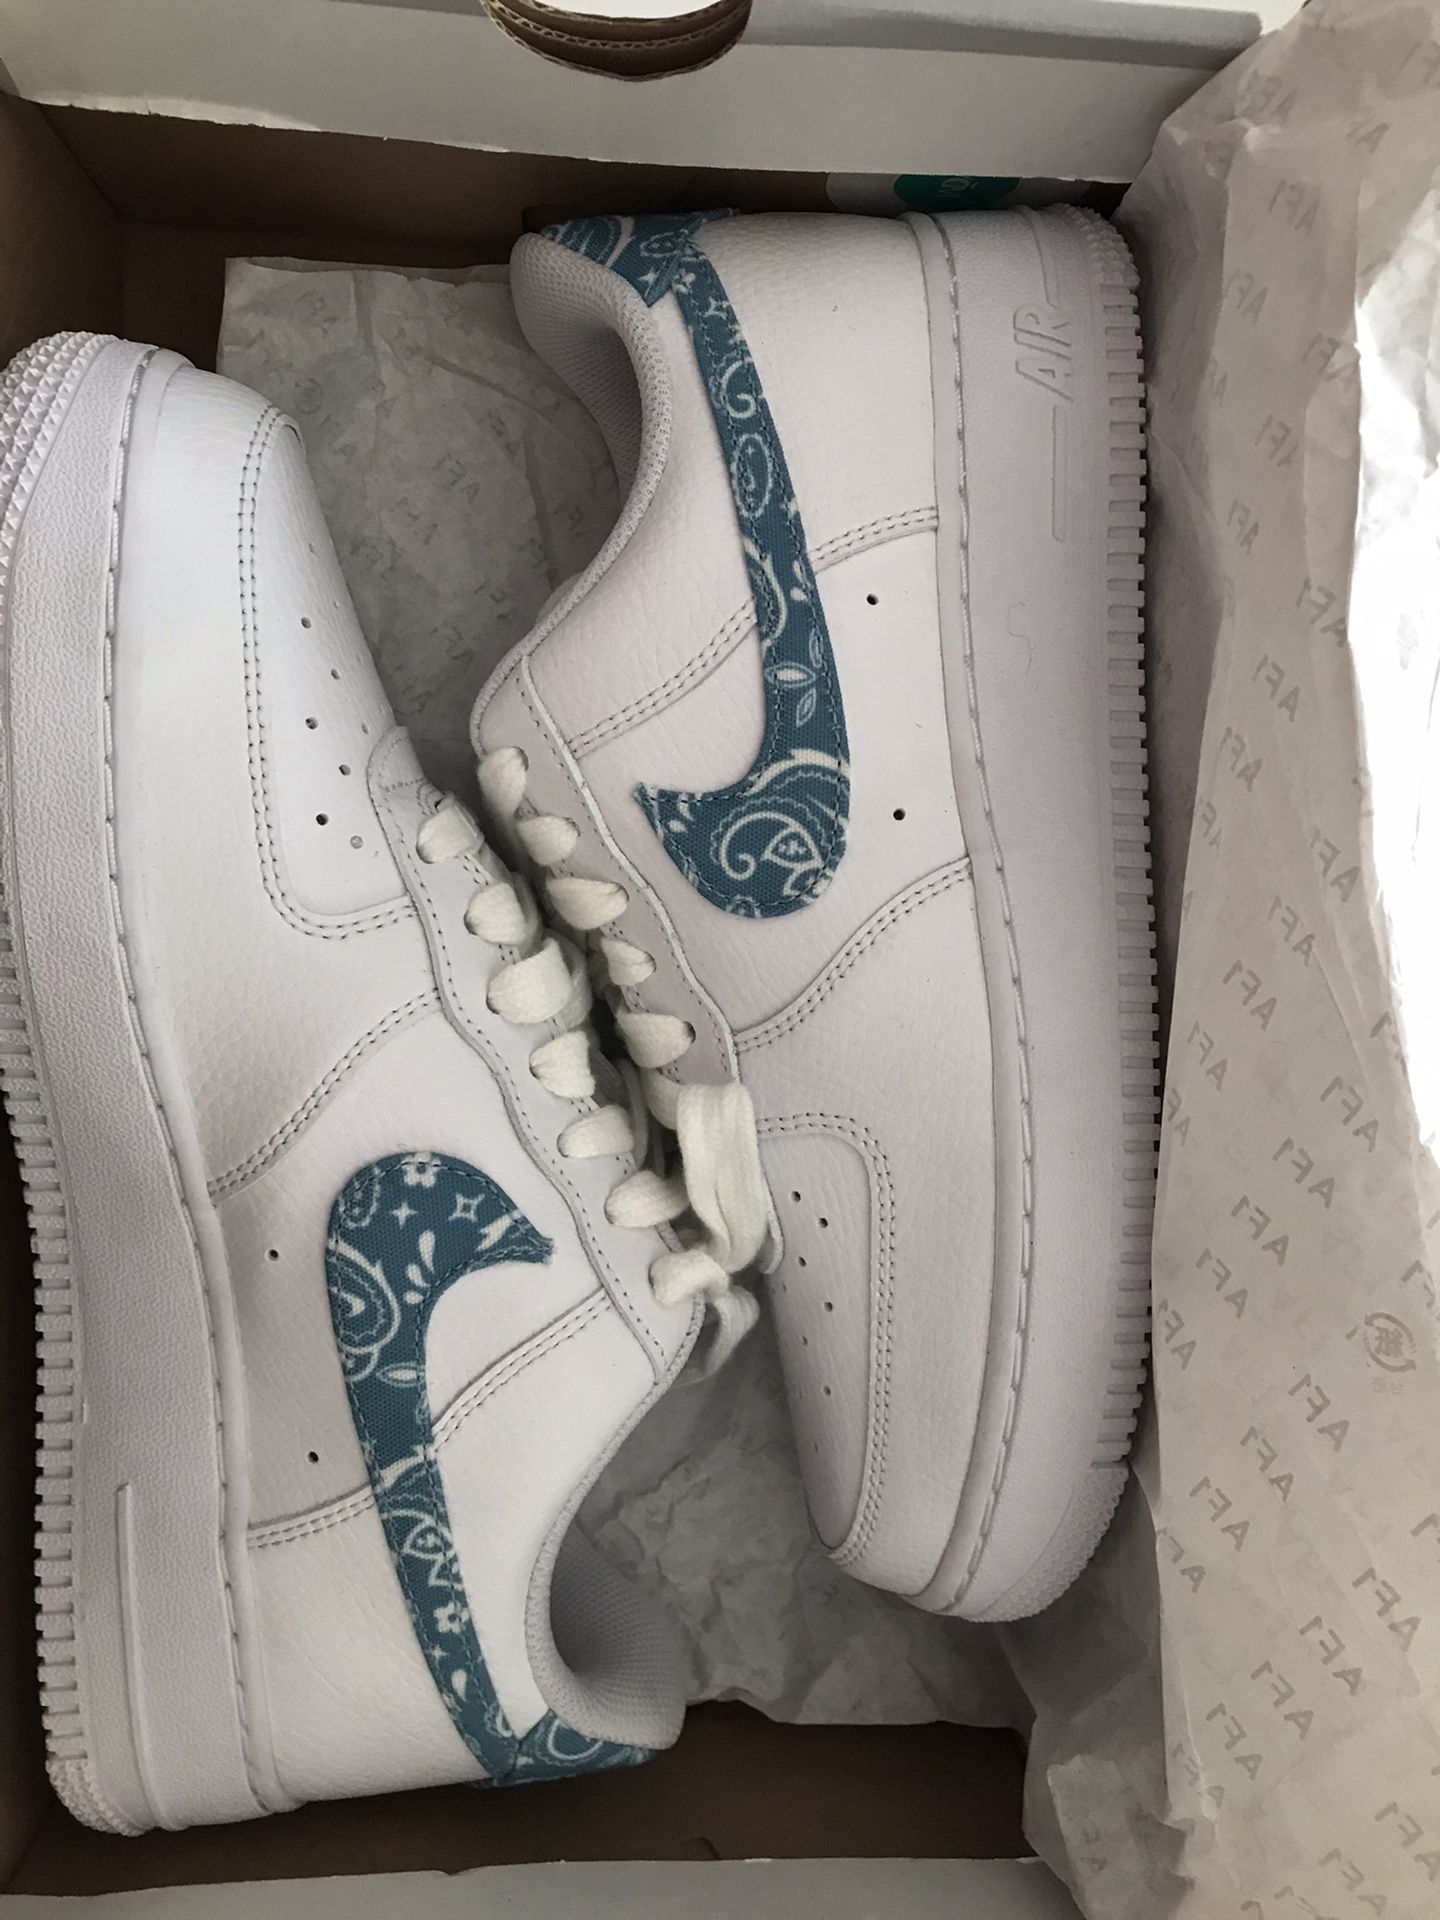 Nike Air Force 1 Low “ Blue Paisley” Size 7W for Sale in San Jose